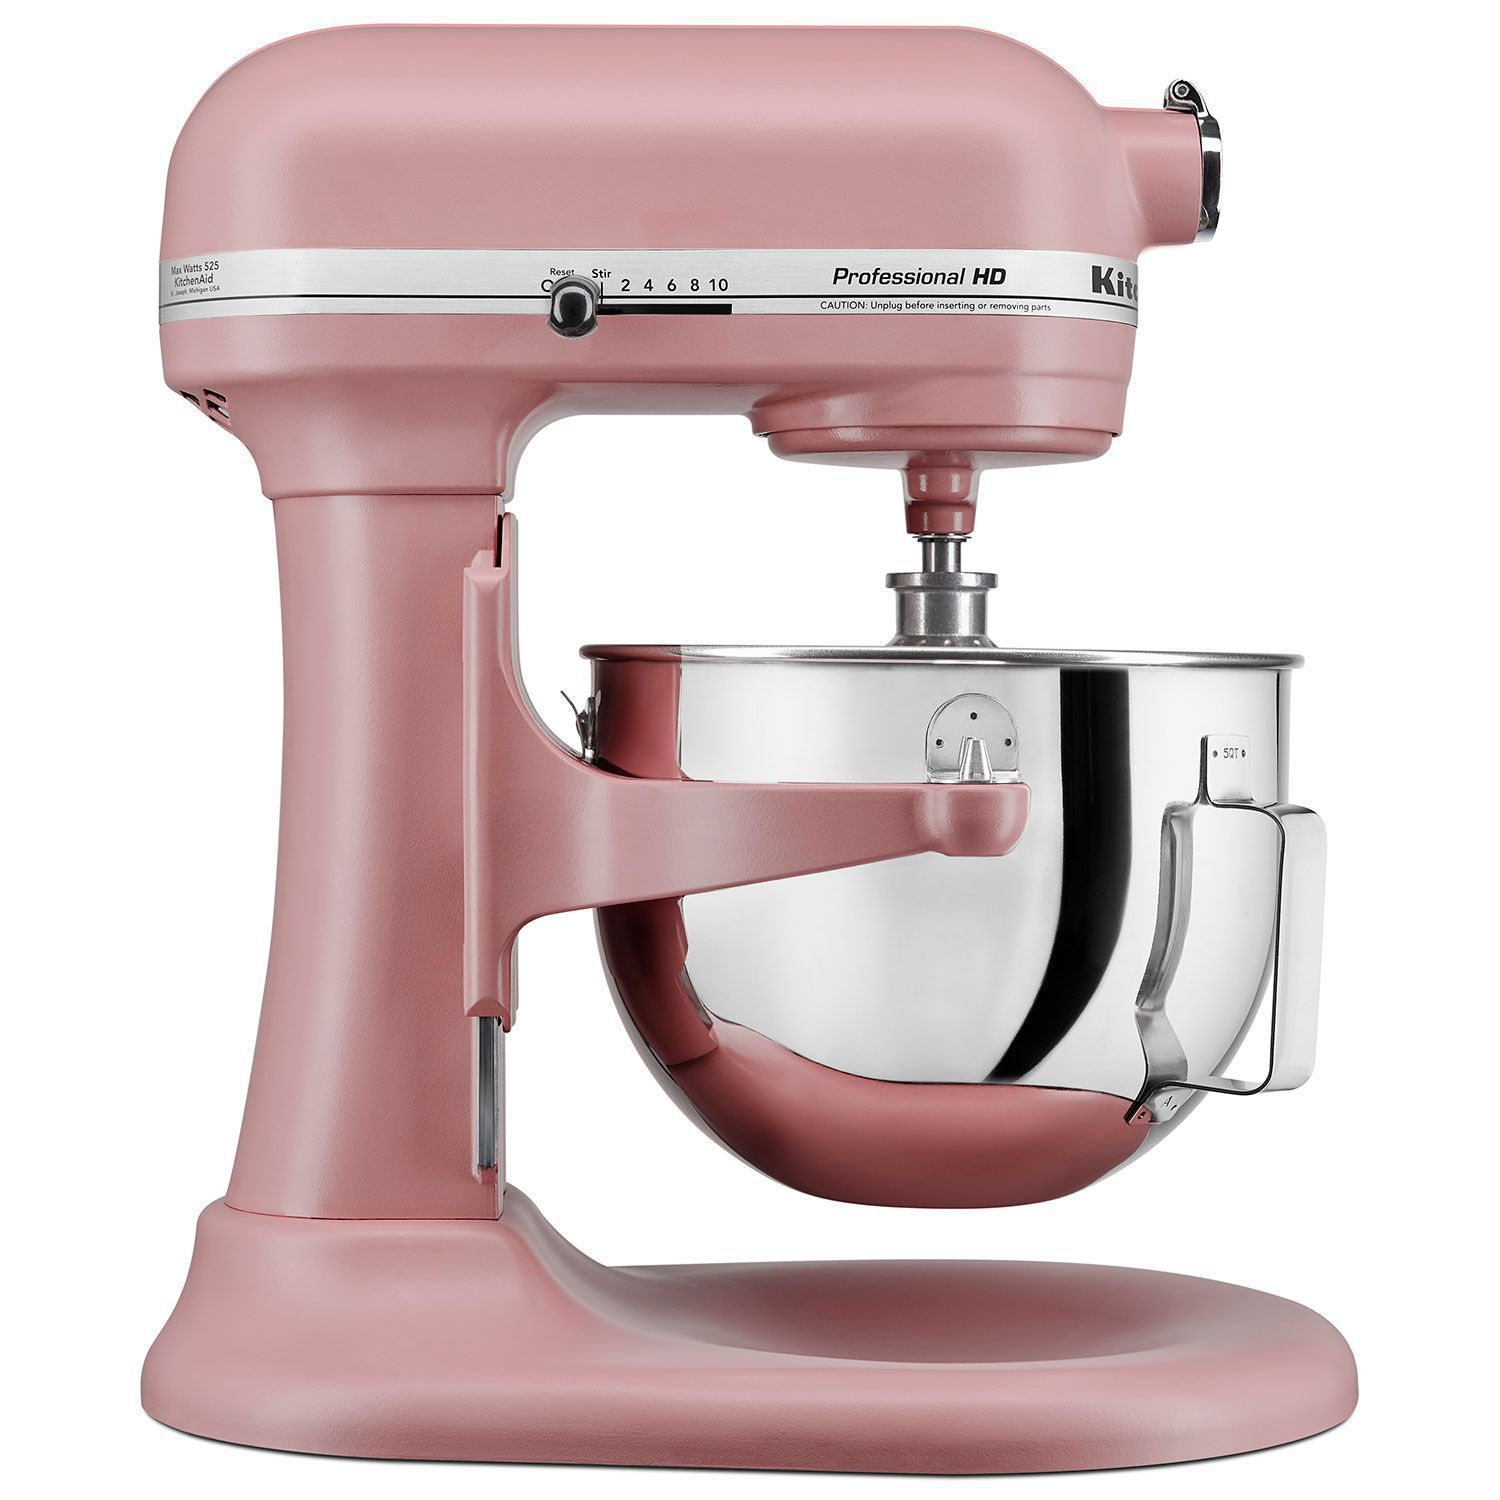 Get KitchenAid Stand Mixer Exclusive Color Dried Rose 70 Off At Sams Club KitchenAid Discounts